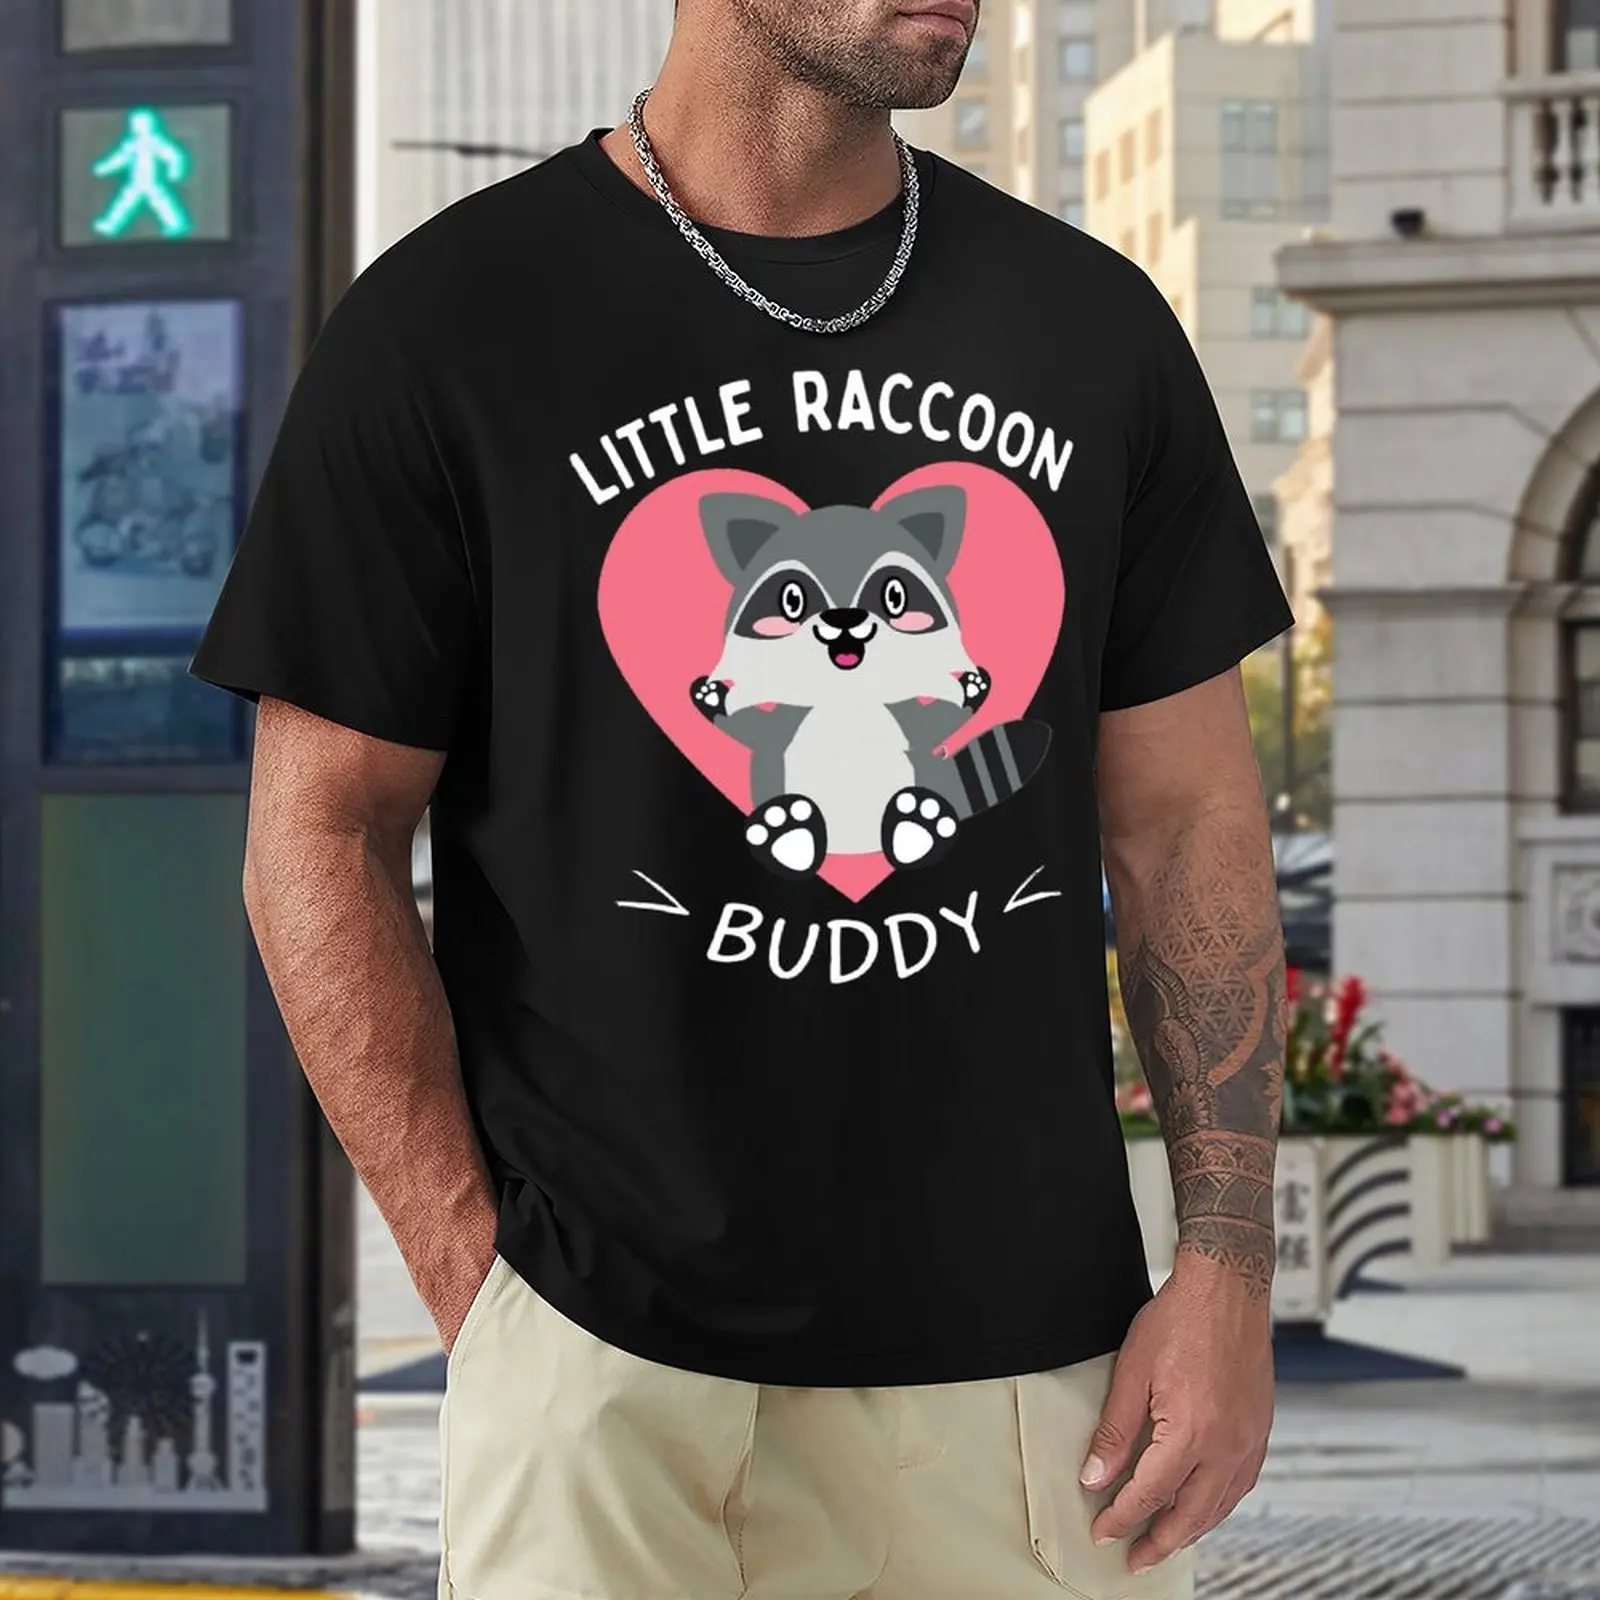 

Little Raccoon Buddy (Raccoon Lover) Classic T-shirt Fresh Campaign T-shirts Hipster Leisure Funny Novelty USA Size